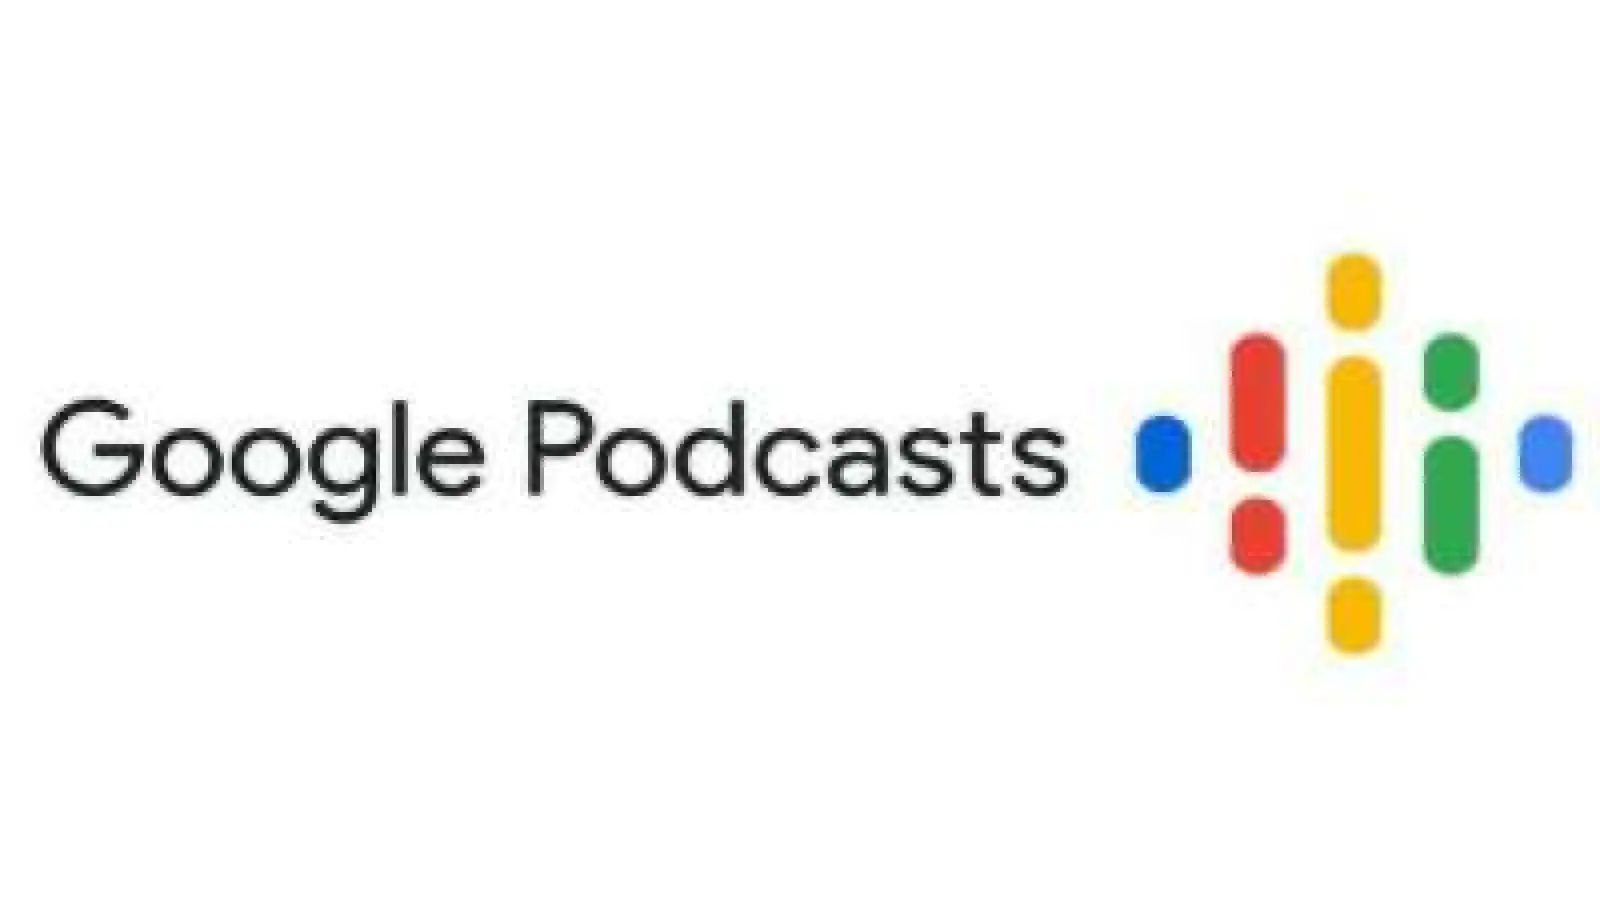 With the closure of Google Podcast, podcast page launched in YouTube Music, what will be the benefit to the users